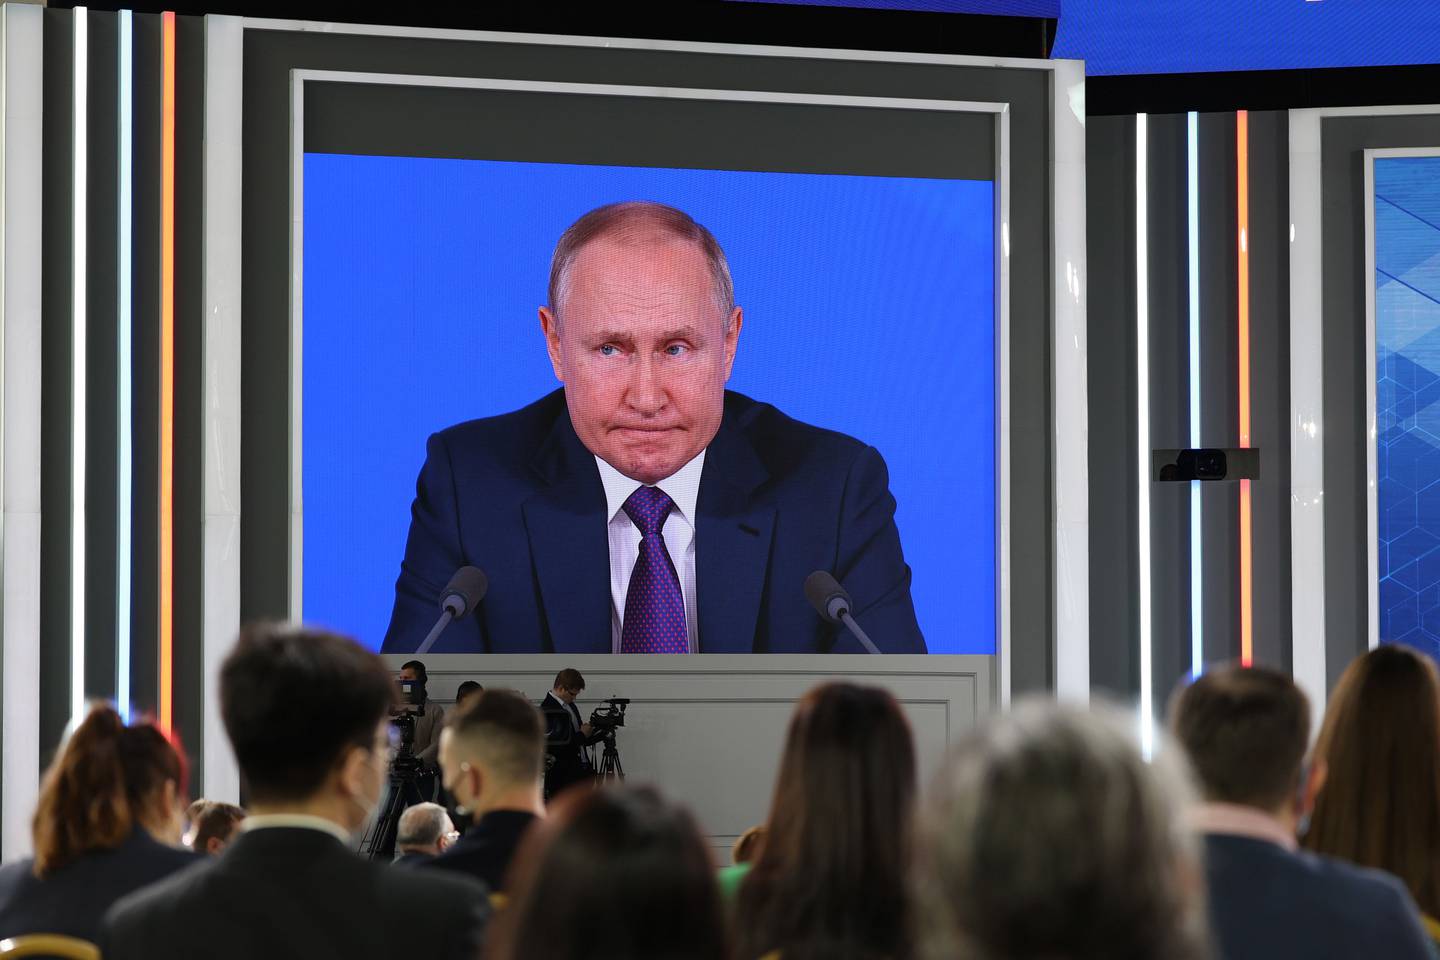 Attendees watch Vladimir Putin, Russia's President, during his annual news conference in Moscow, Russia, on Thursday, Dec. 23, 2021. Russia is continuing to build up forces close to Ukraine even as its preparing for security talks with the U.S., keeping up pressure with a deployment that could turn into a rapid invasion or a long-term threat. Photographer: Andrey Rudakov/Bloomberg